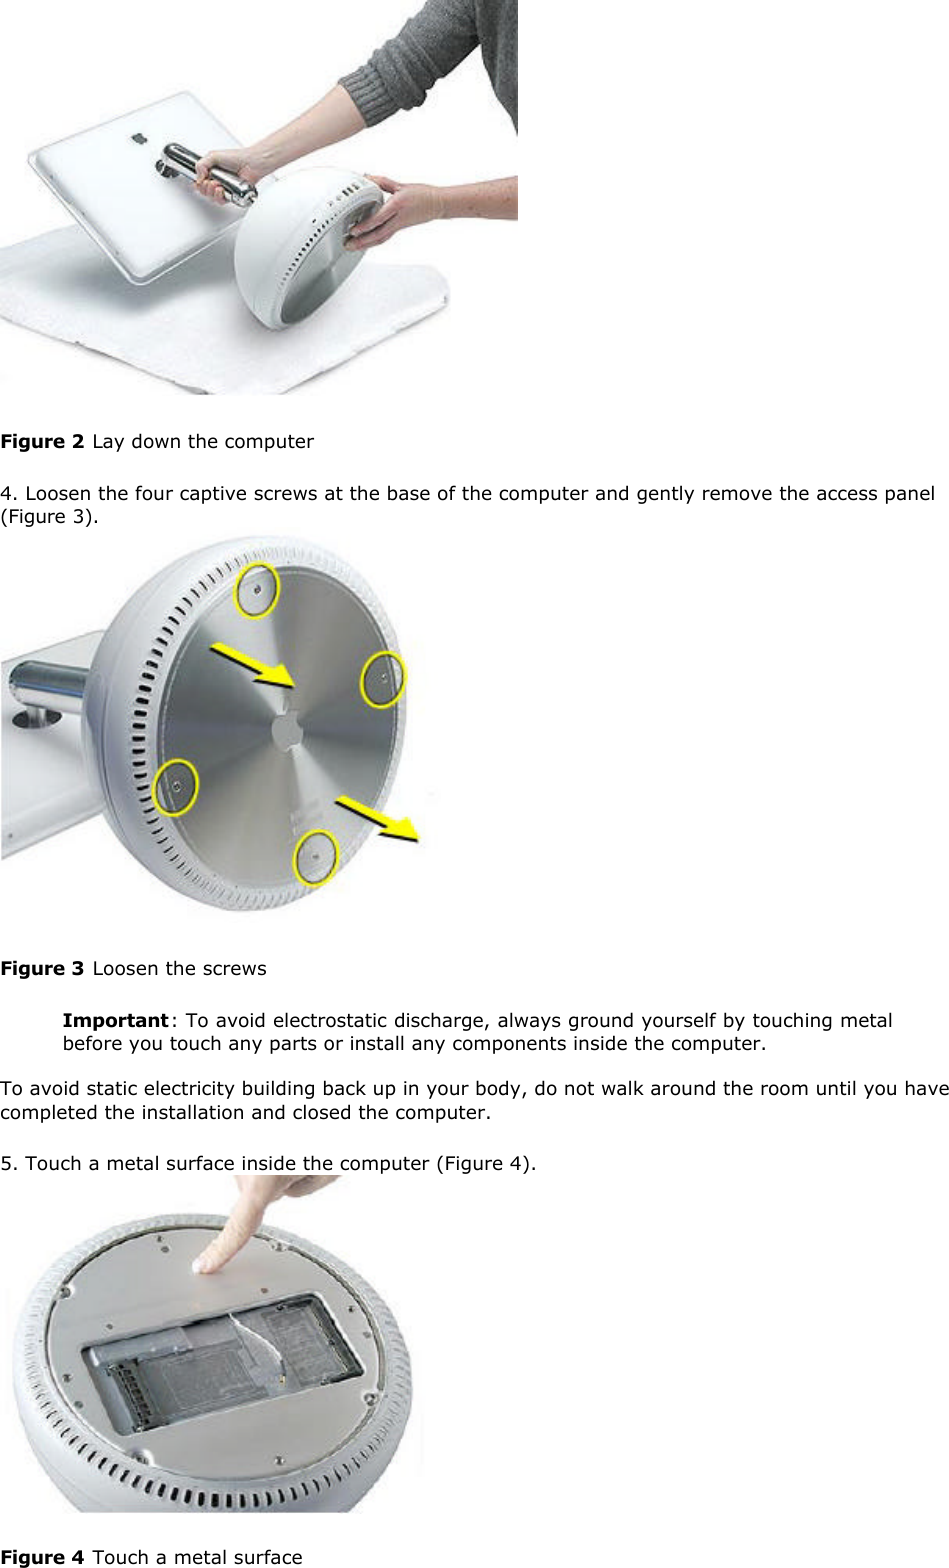   Figure 2 Lay down the computer  4. Loosen the four captive screws at the base of the computer and gently remove the access panel (Figure 3).    Figure 3 Loosen the screws  Important: To avoid electrostatic discharge, always ground yourself by touching metal before you touch any parts or install any components inside the computer.  To avoid static electricity building back up in your body, do not walk around the room until you have completed the installation and closed the computer. 5. Touch a metal surface inside the computer (Figure 4).    Figure 4 Touch a metal surface  